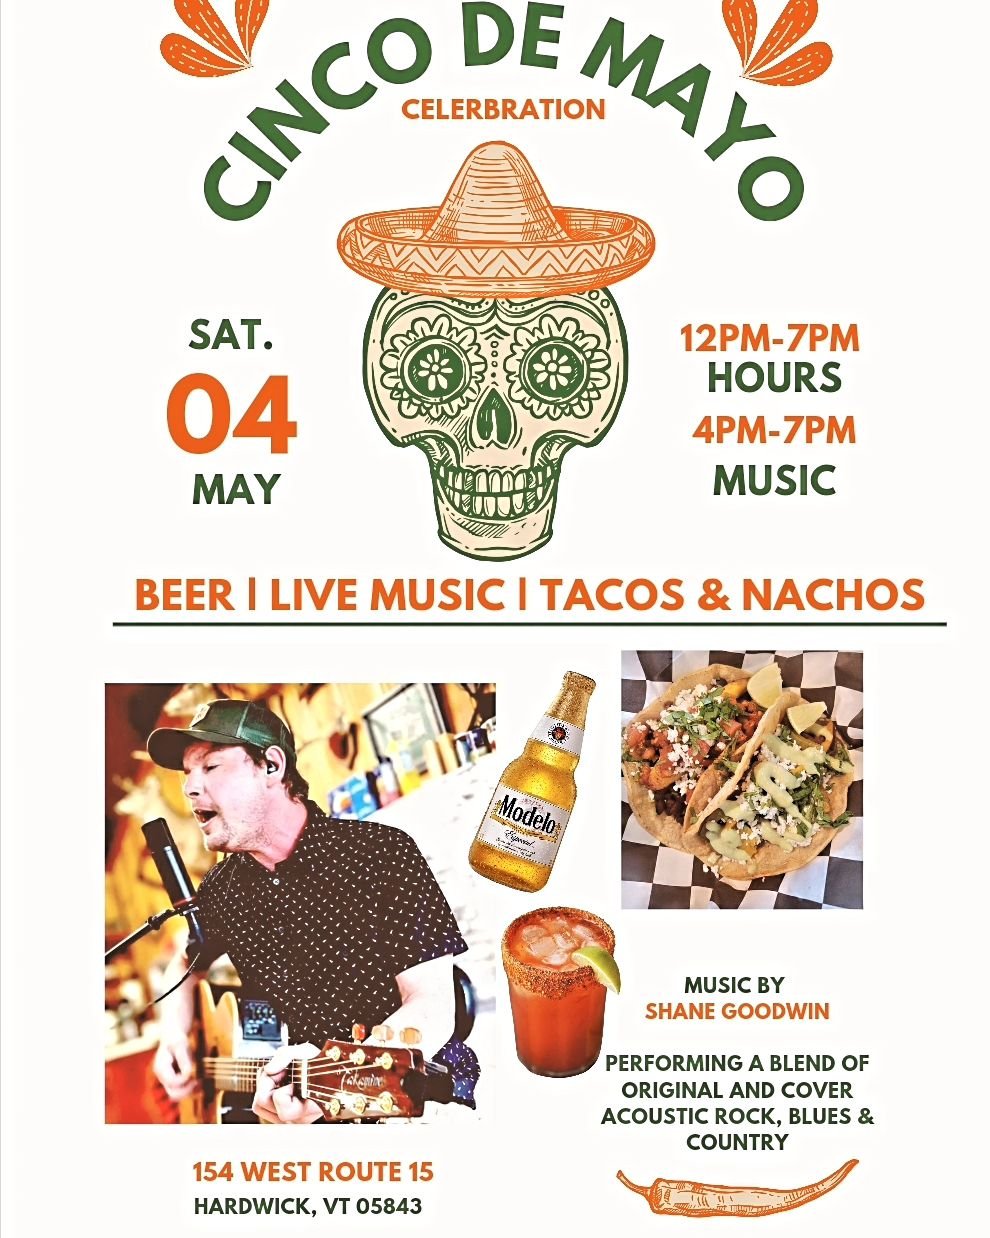 May 4th, there will be no axe throwing offered! 
@caja_madera &amp; @master_fins_axe_throwing will be celebrating Cindo de Mayo on Cuatro de Mayo 🌮🇲🇽🫔
(May the 4th be with you!)

Saturday May 4th
12pm-7pm
And live music at 4pm till 7pm

@caja_mad